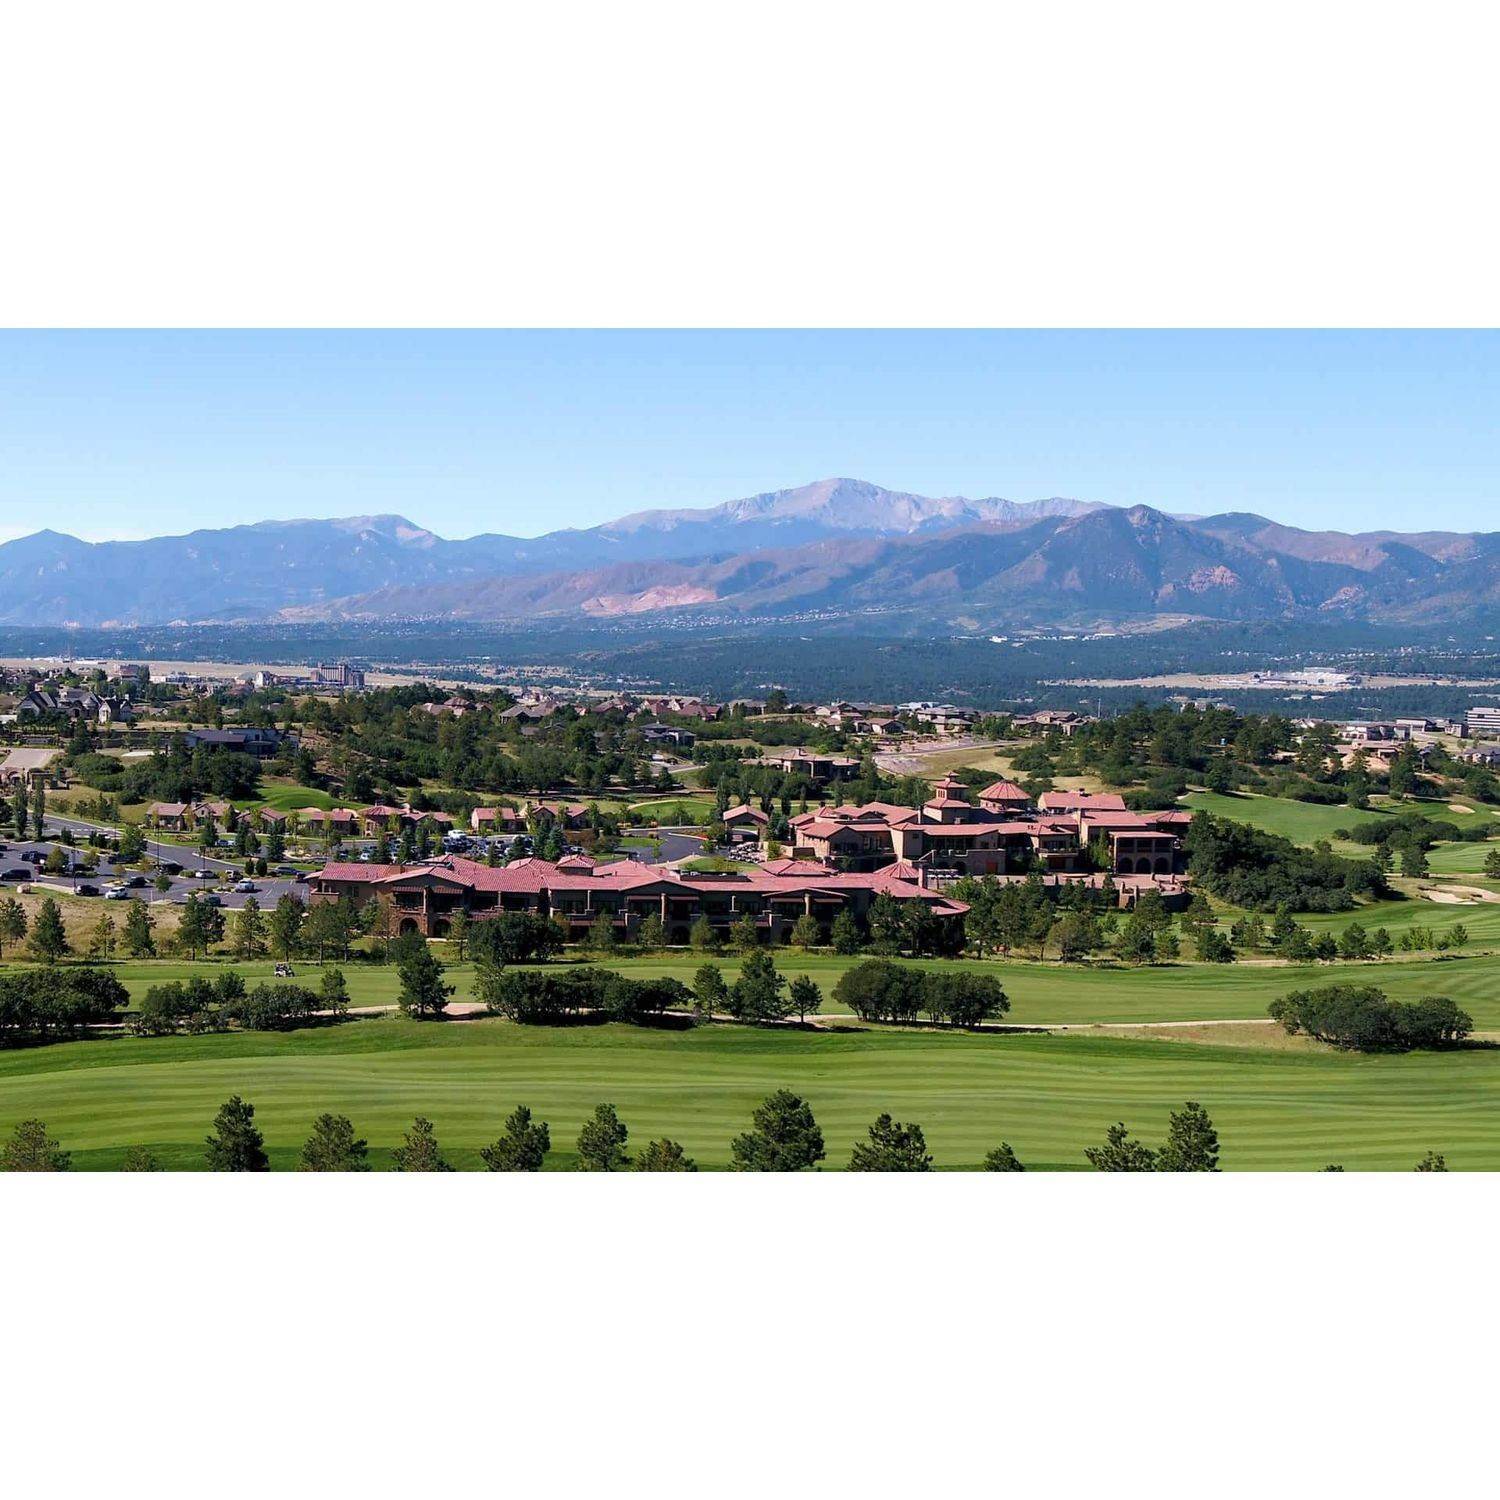 7. Flying Horse建於 2409 Parma Court, Colorado Springs, CO 80921